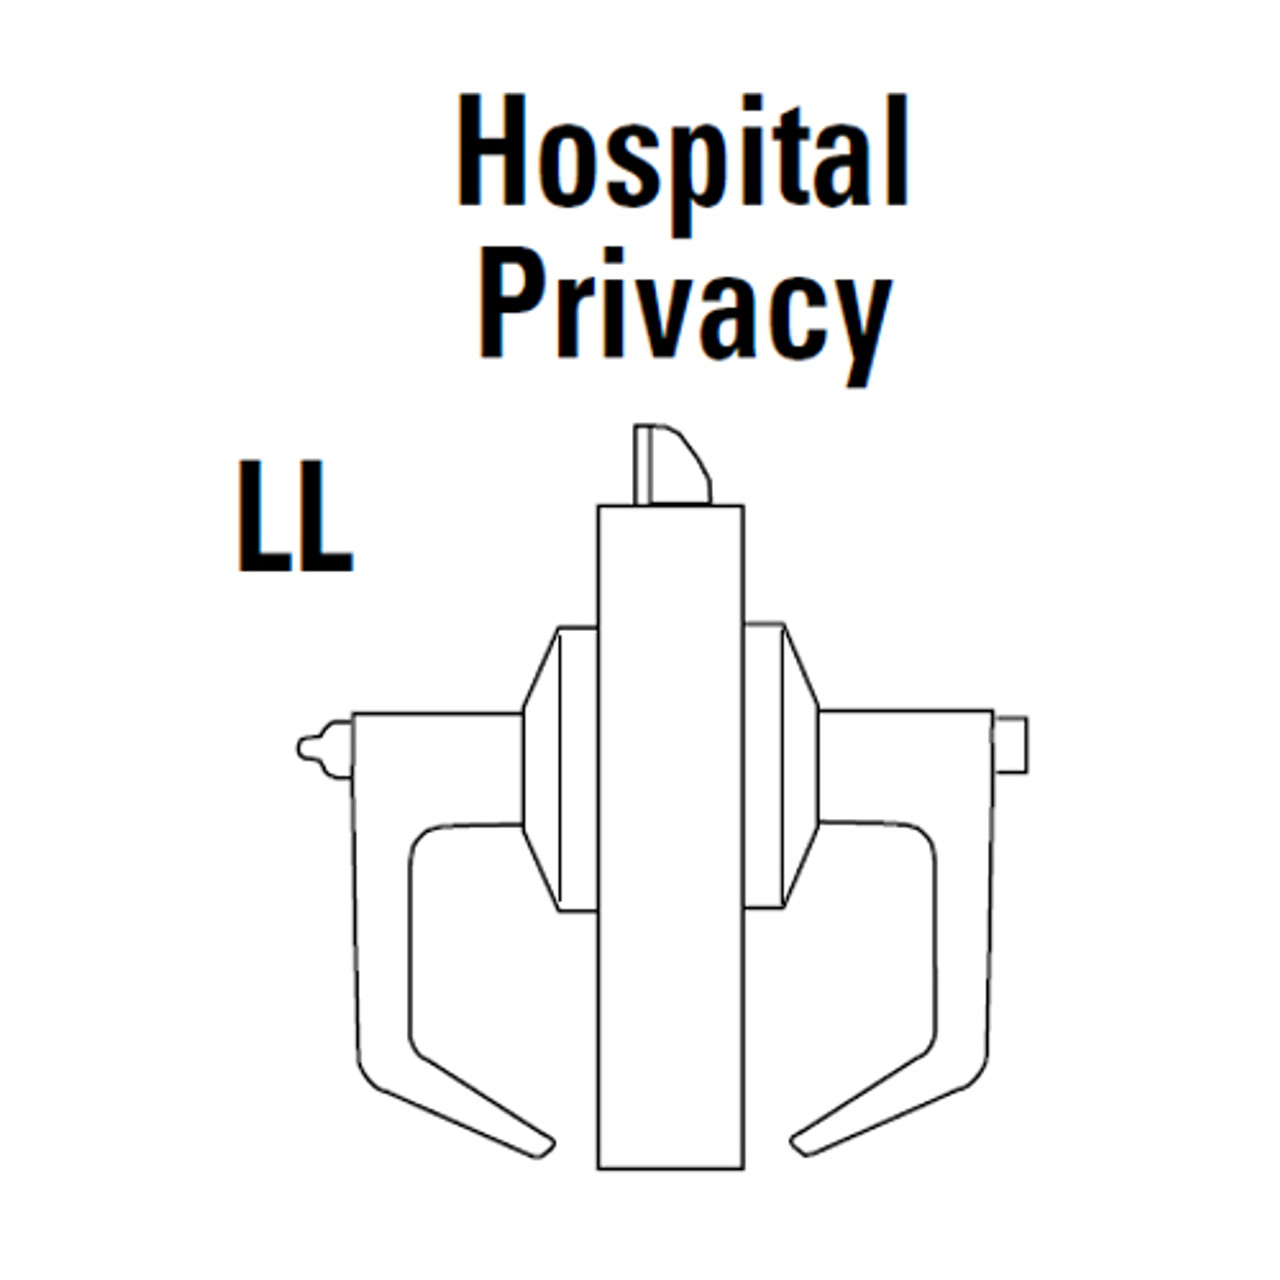 9K30LL16KS3618 Best 9K Series Hospital Privacy Heavy Duty Cylindrical Lever Locks with Curved Without Return Lever Design in Bright Nickel